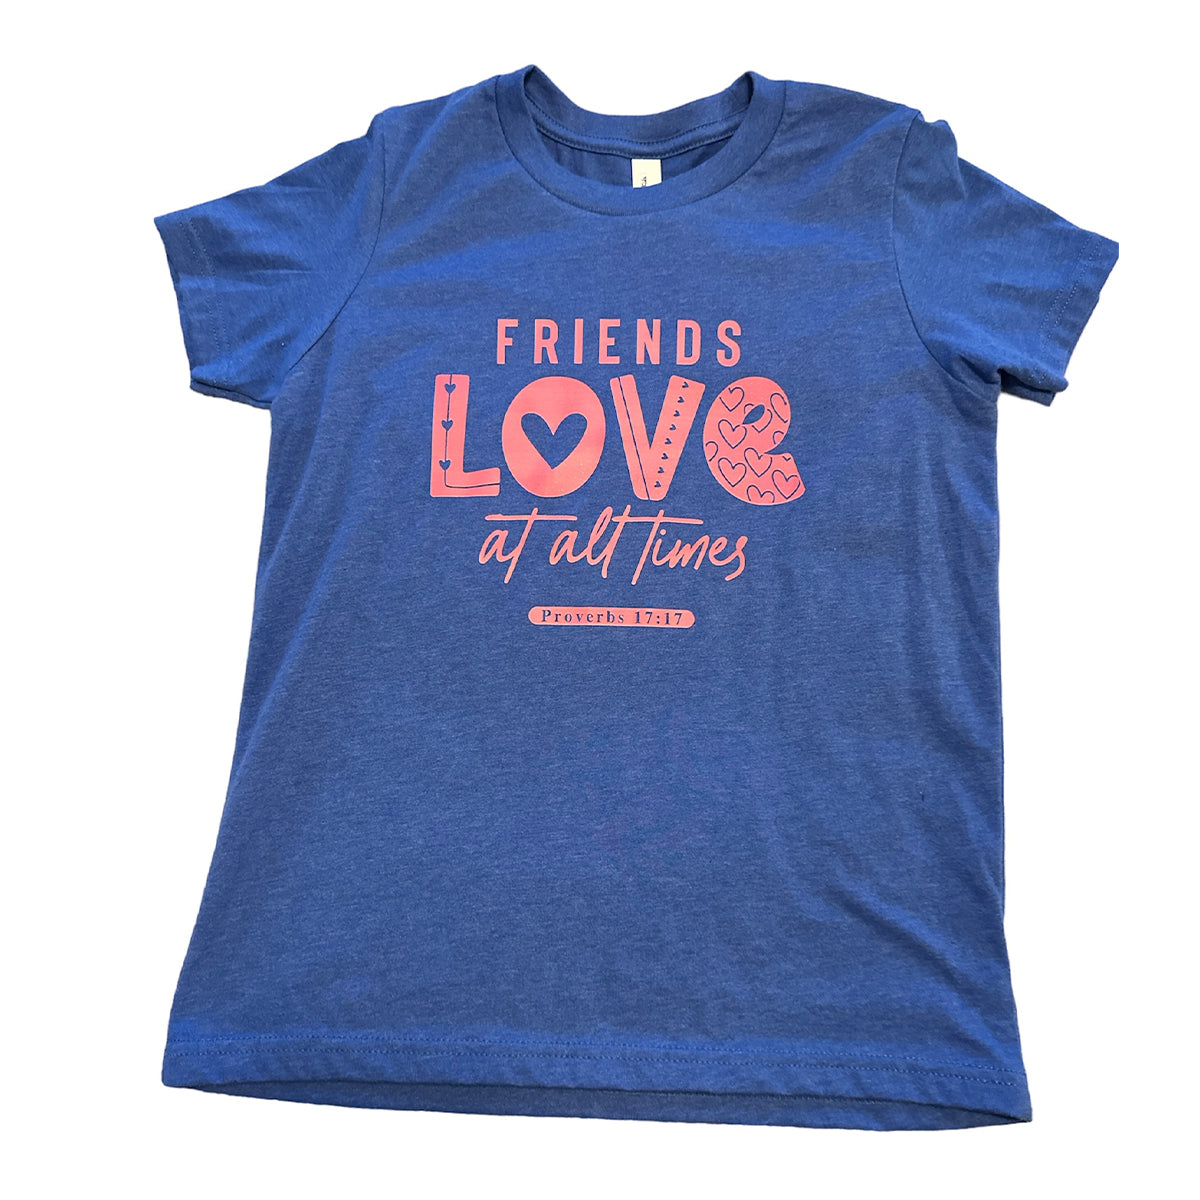 Friends Loves At All Times - T-Shirt